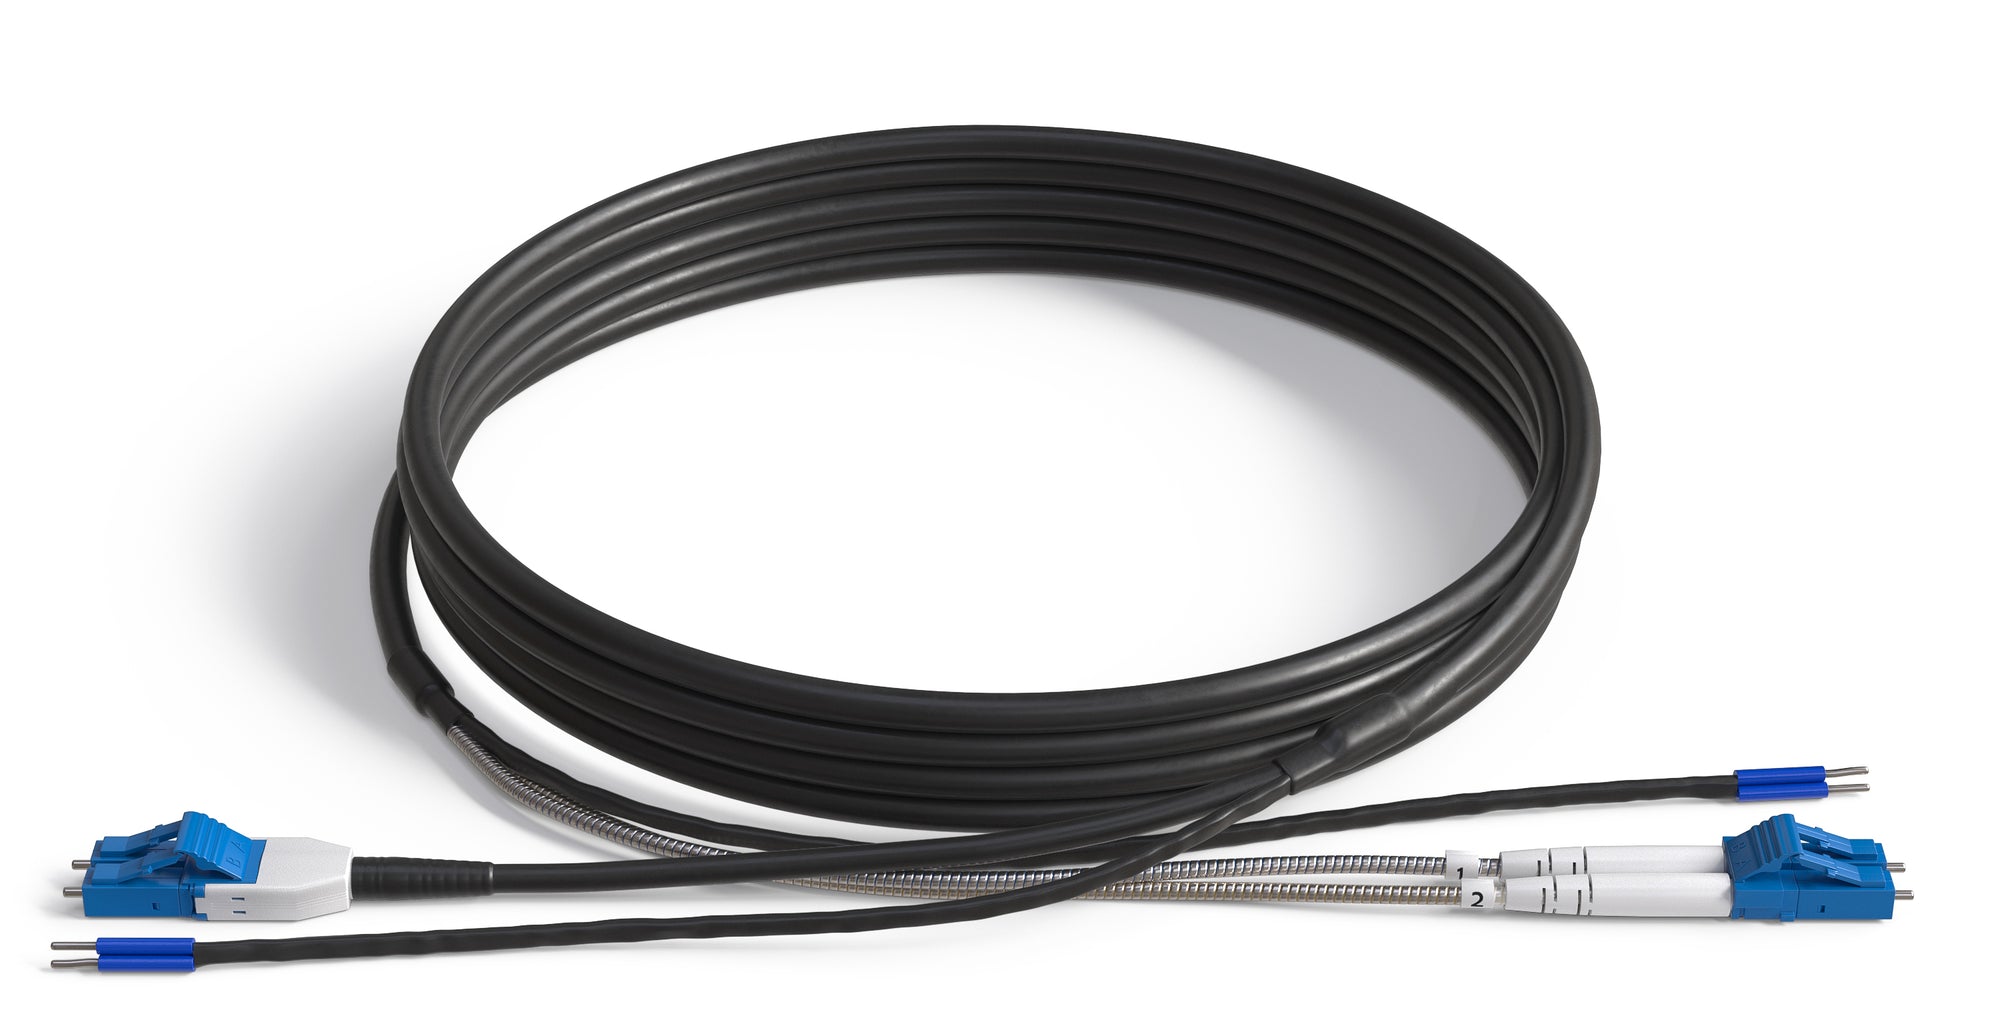 Hybrid Fiber and Power Jumper Cable